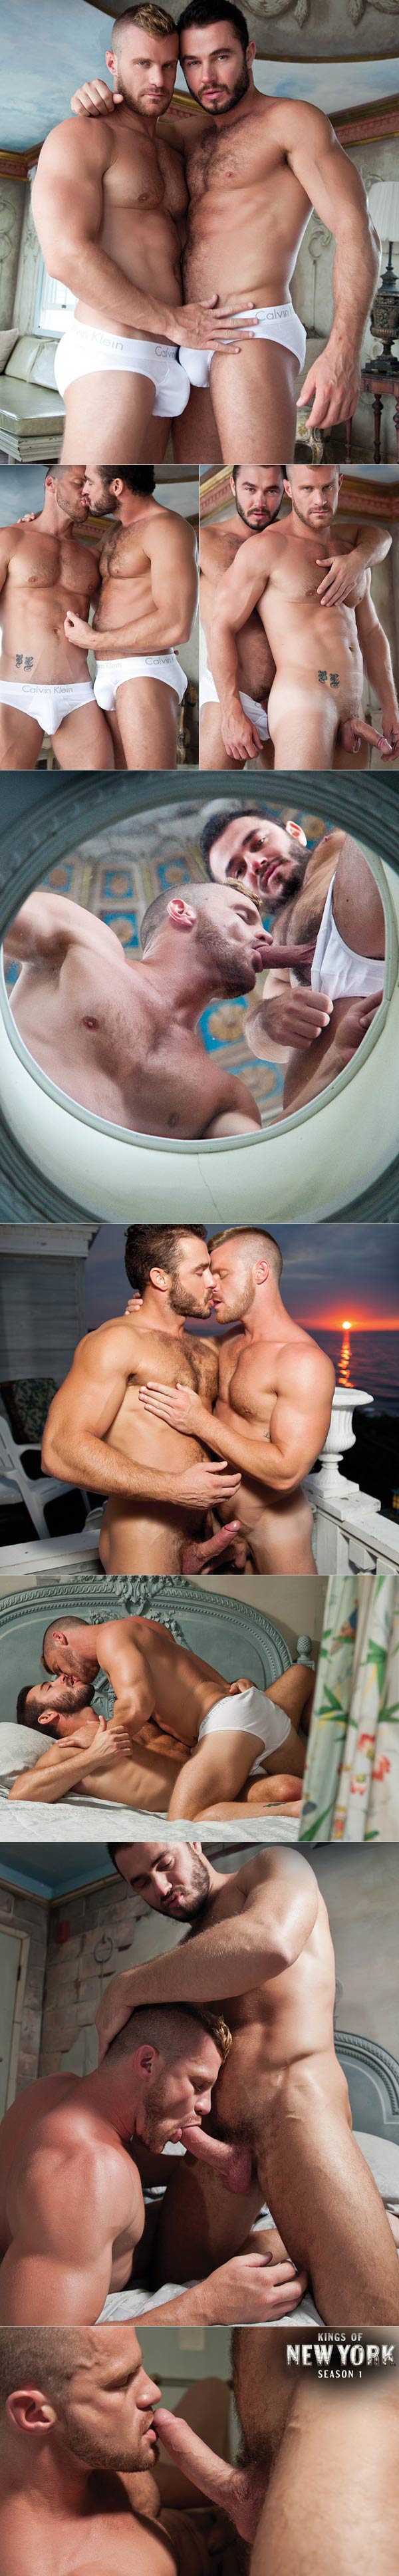 Kings of New York (Jessy Ares Pounds Landon Conrad) at LucasEntertainment.com